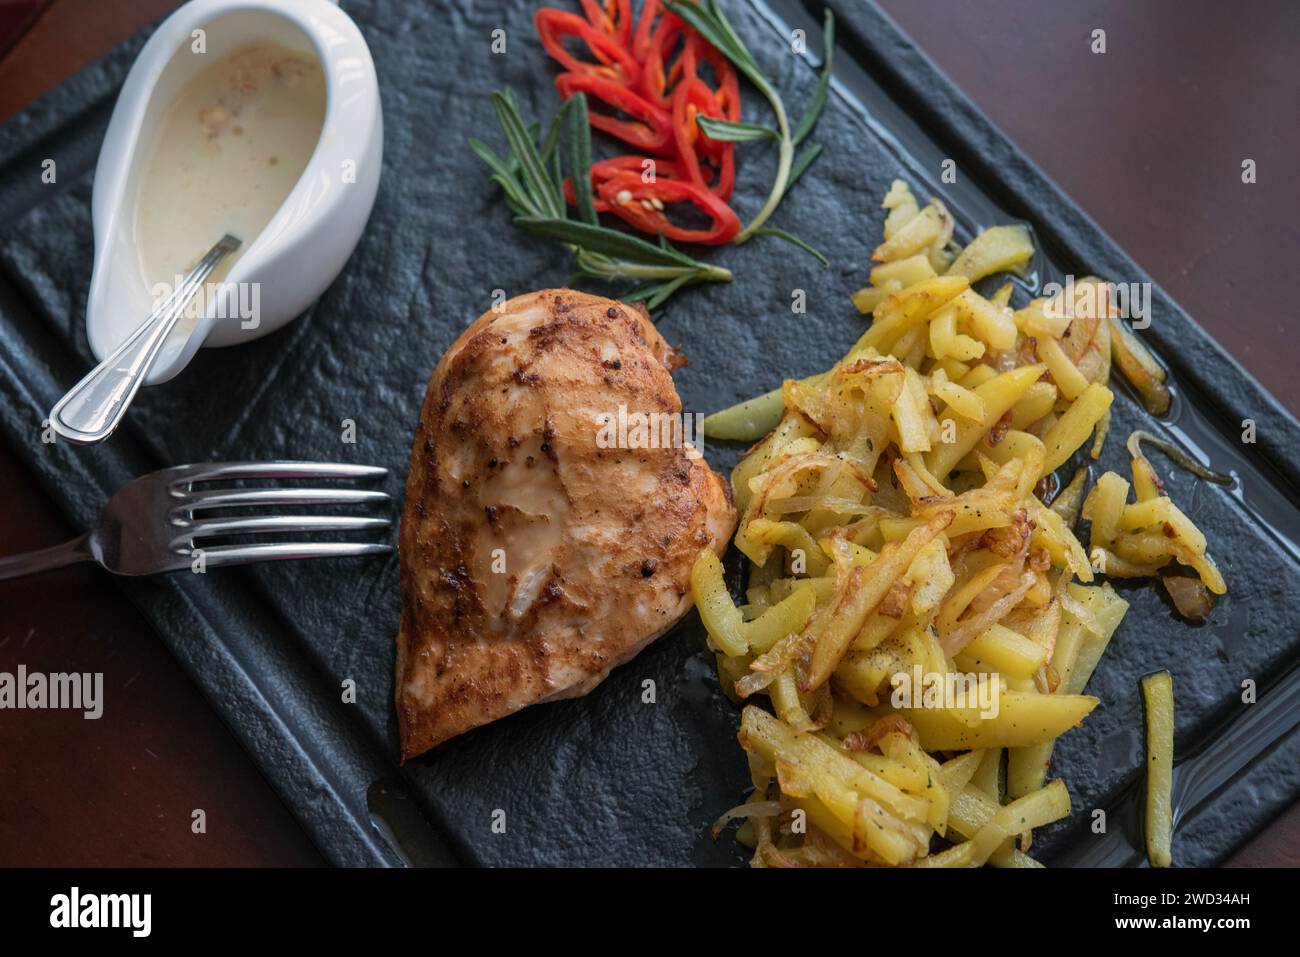 Chicken Recipe Plated in a Restaurant Stock Photo